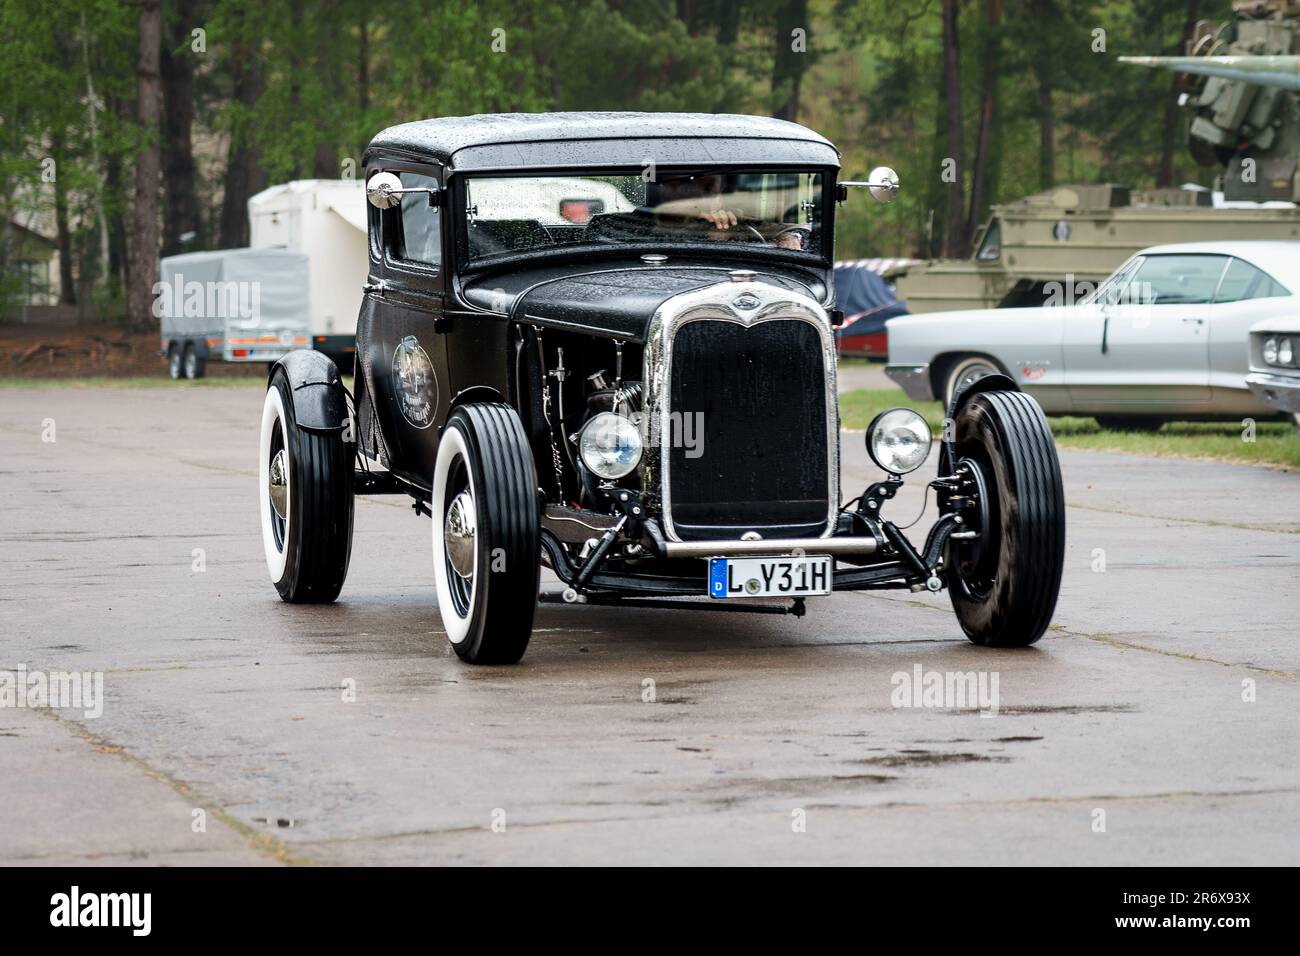 FINOWFURT, GERMANY - MAY 06, 2023: The hot rod based on Ford Model A, 1931. Race festival 2023. Season opening. Stock Photo